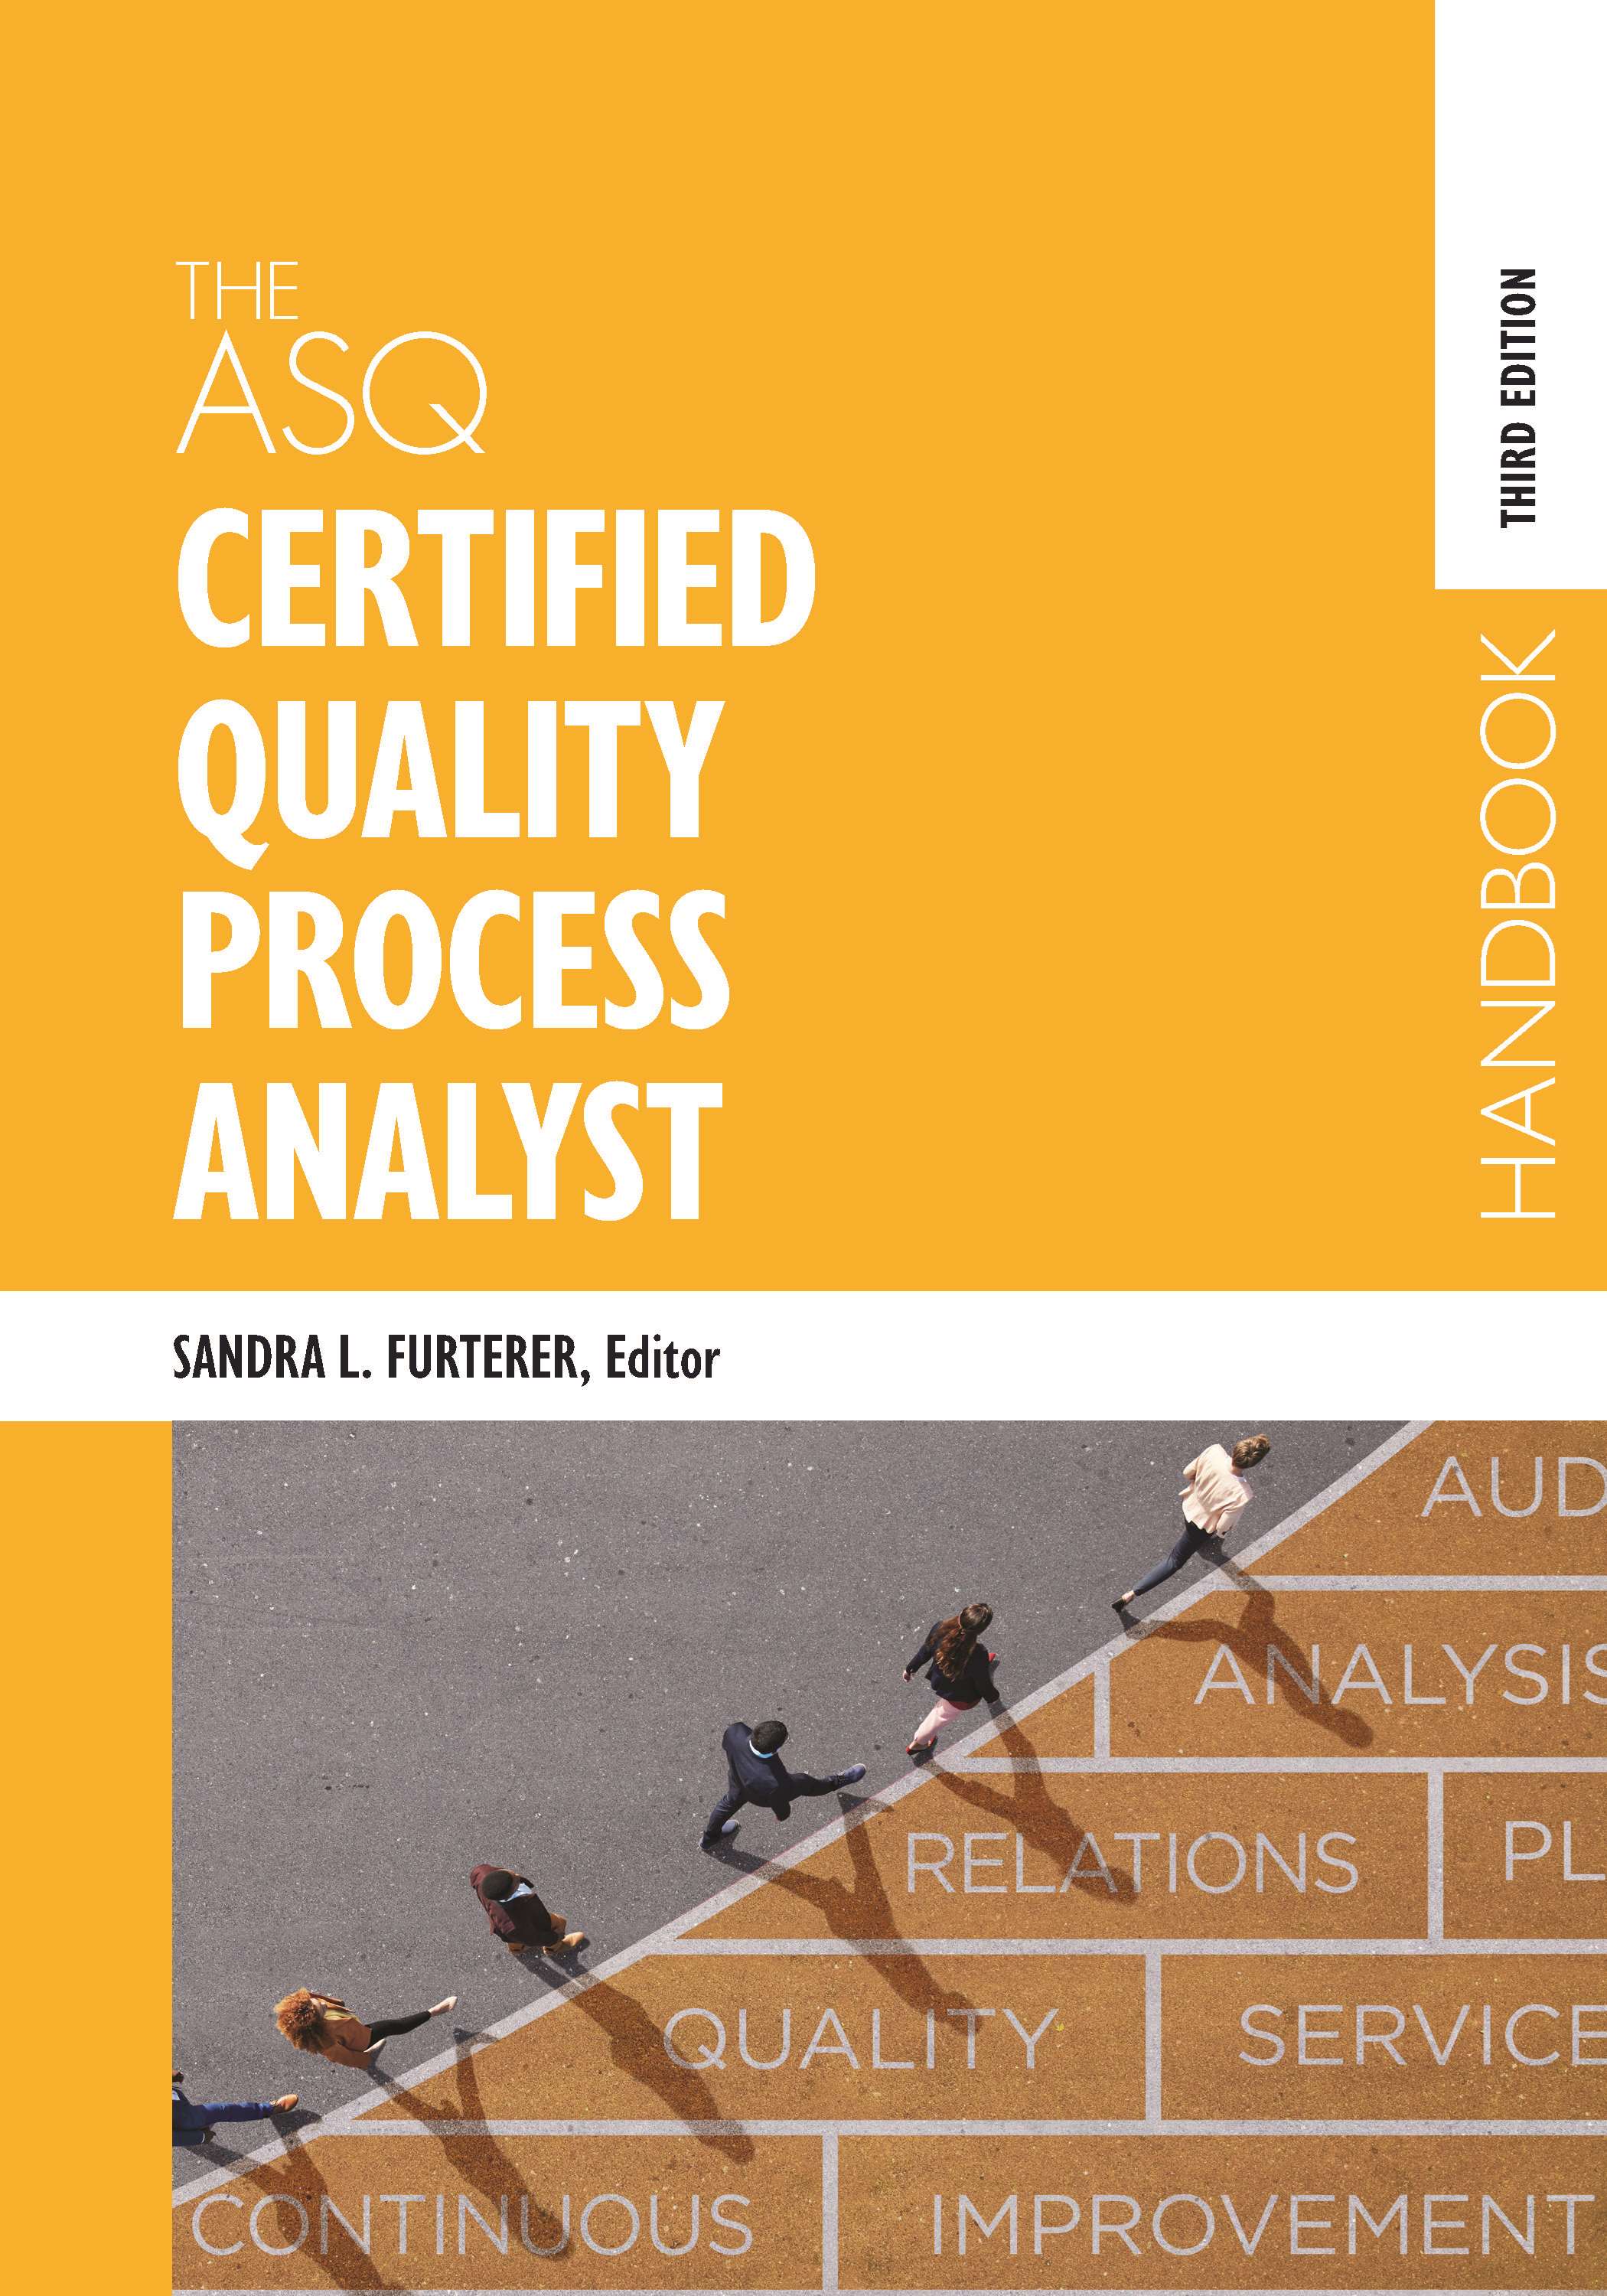 The ASQ Certified Quality Process Analyst Handbook, Third Edition